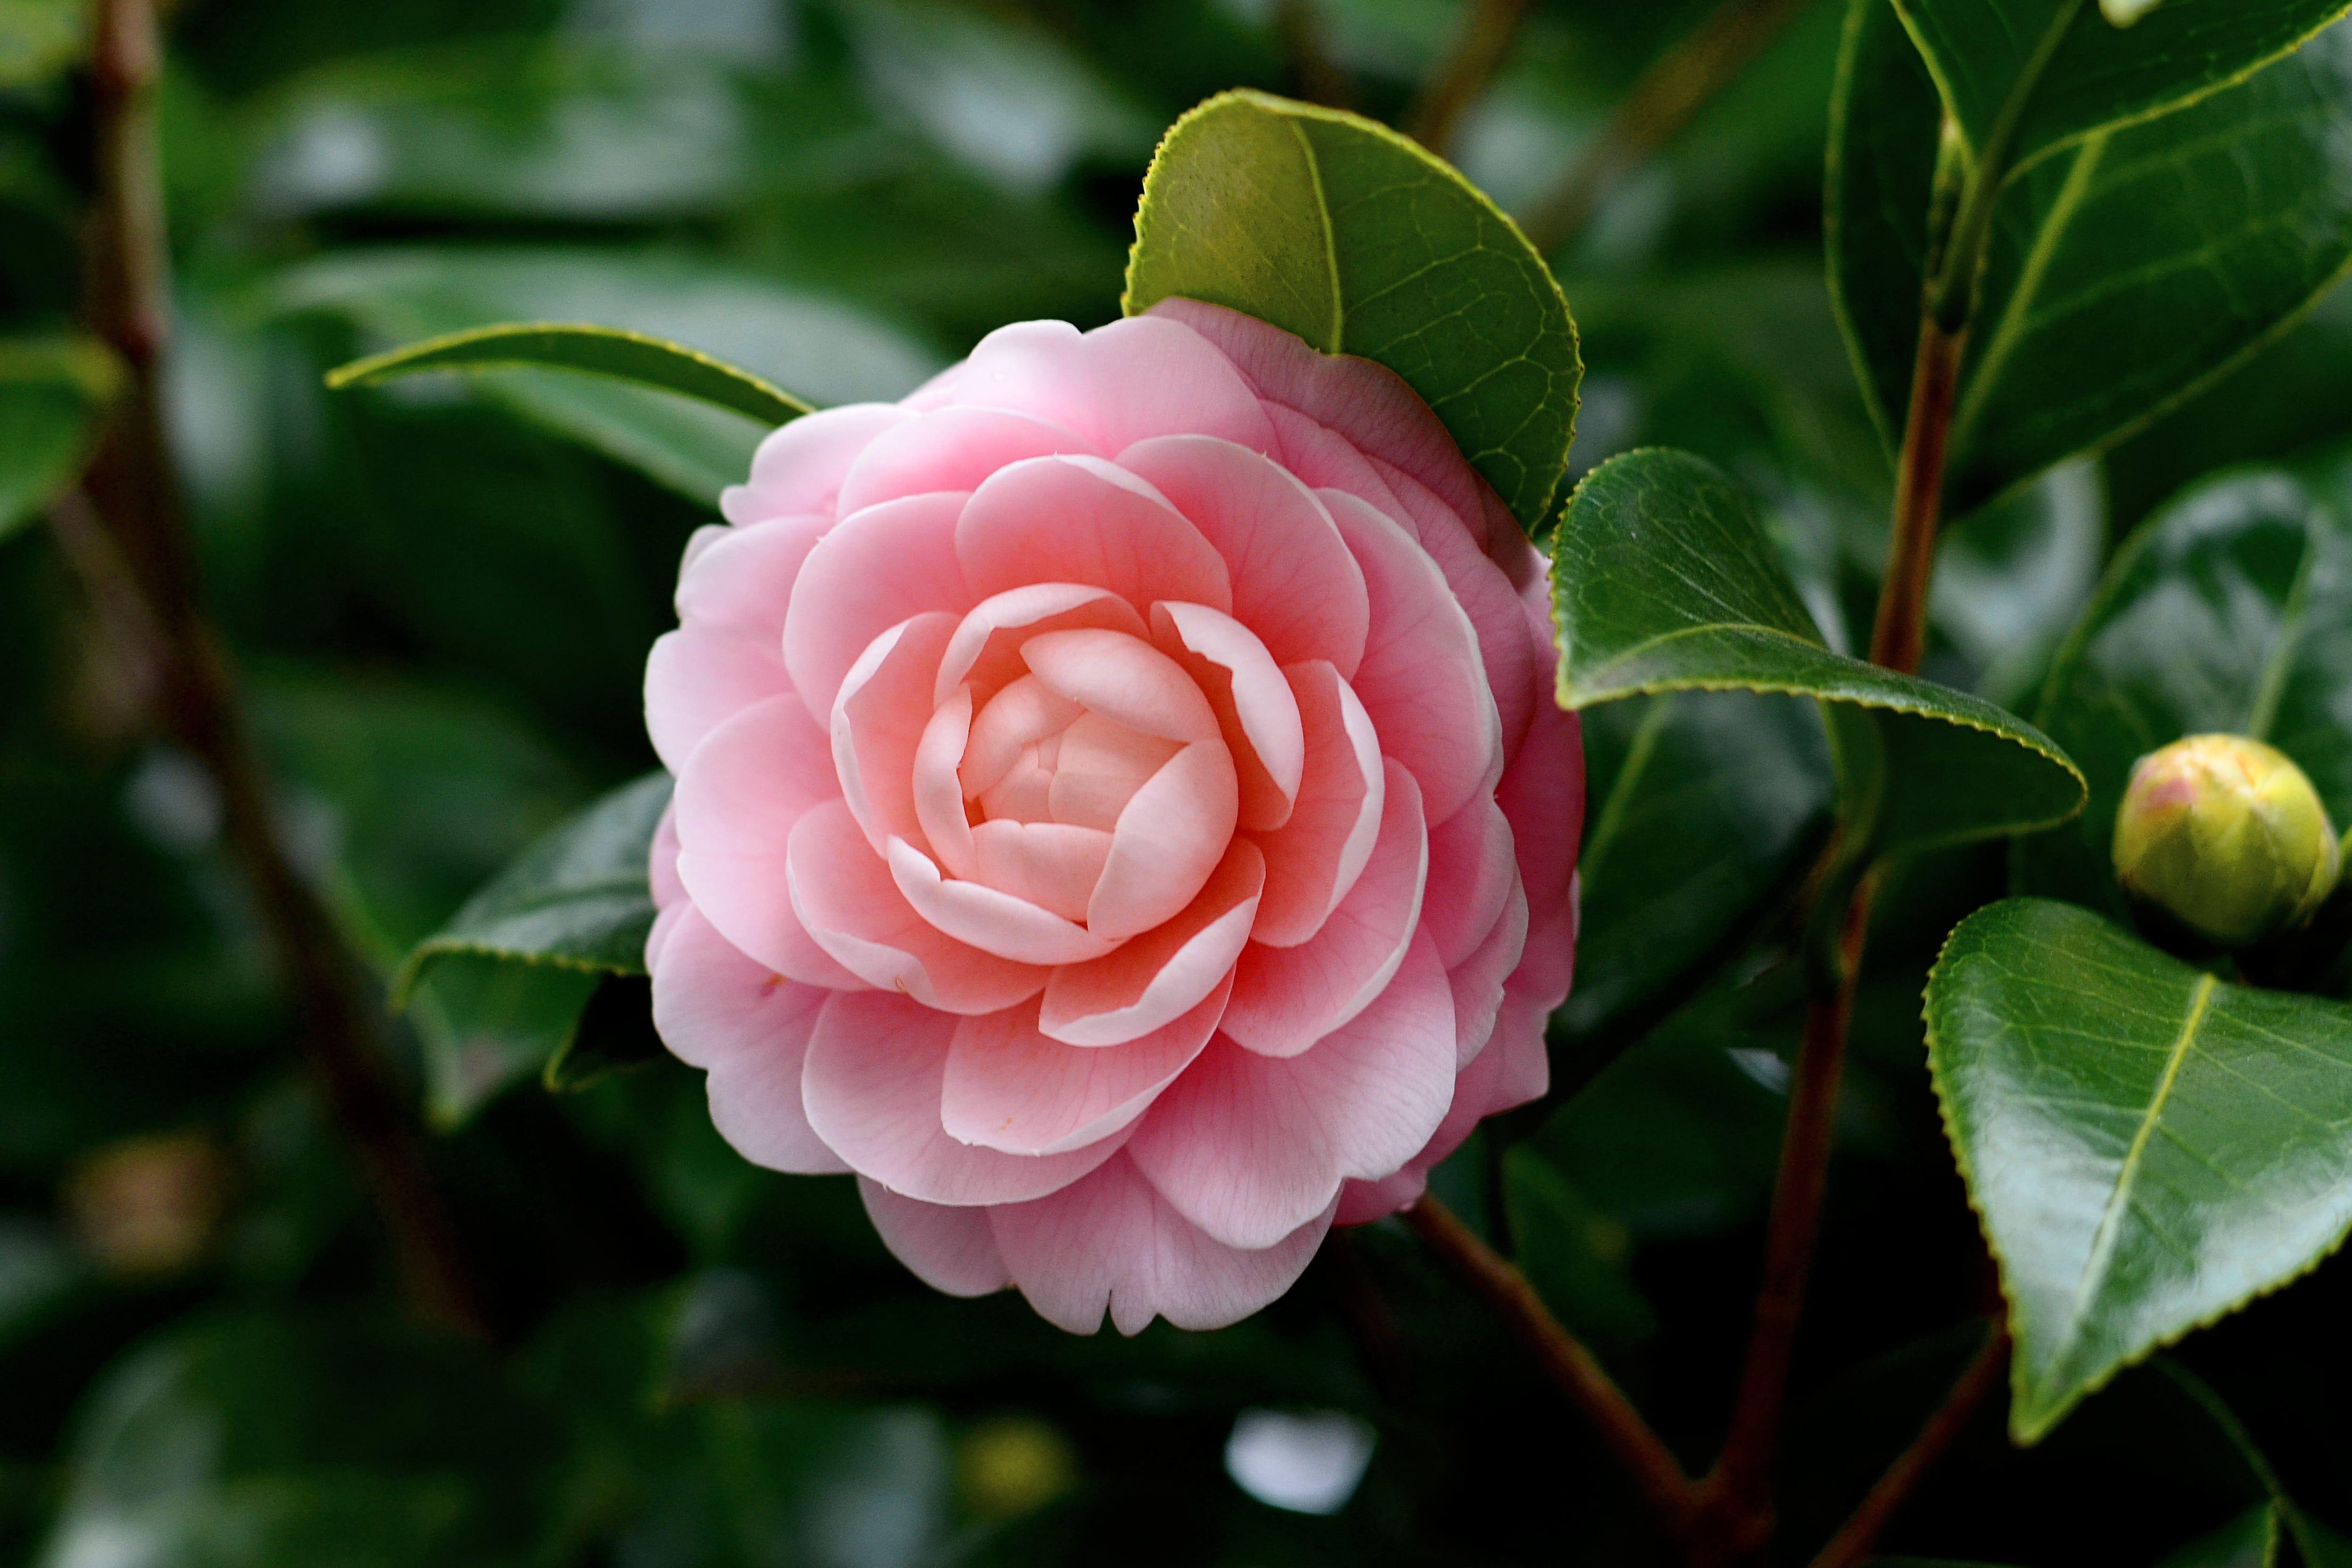 15 Top camellia flower desktop wallpaper You Can Save It Without A ...